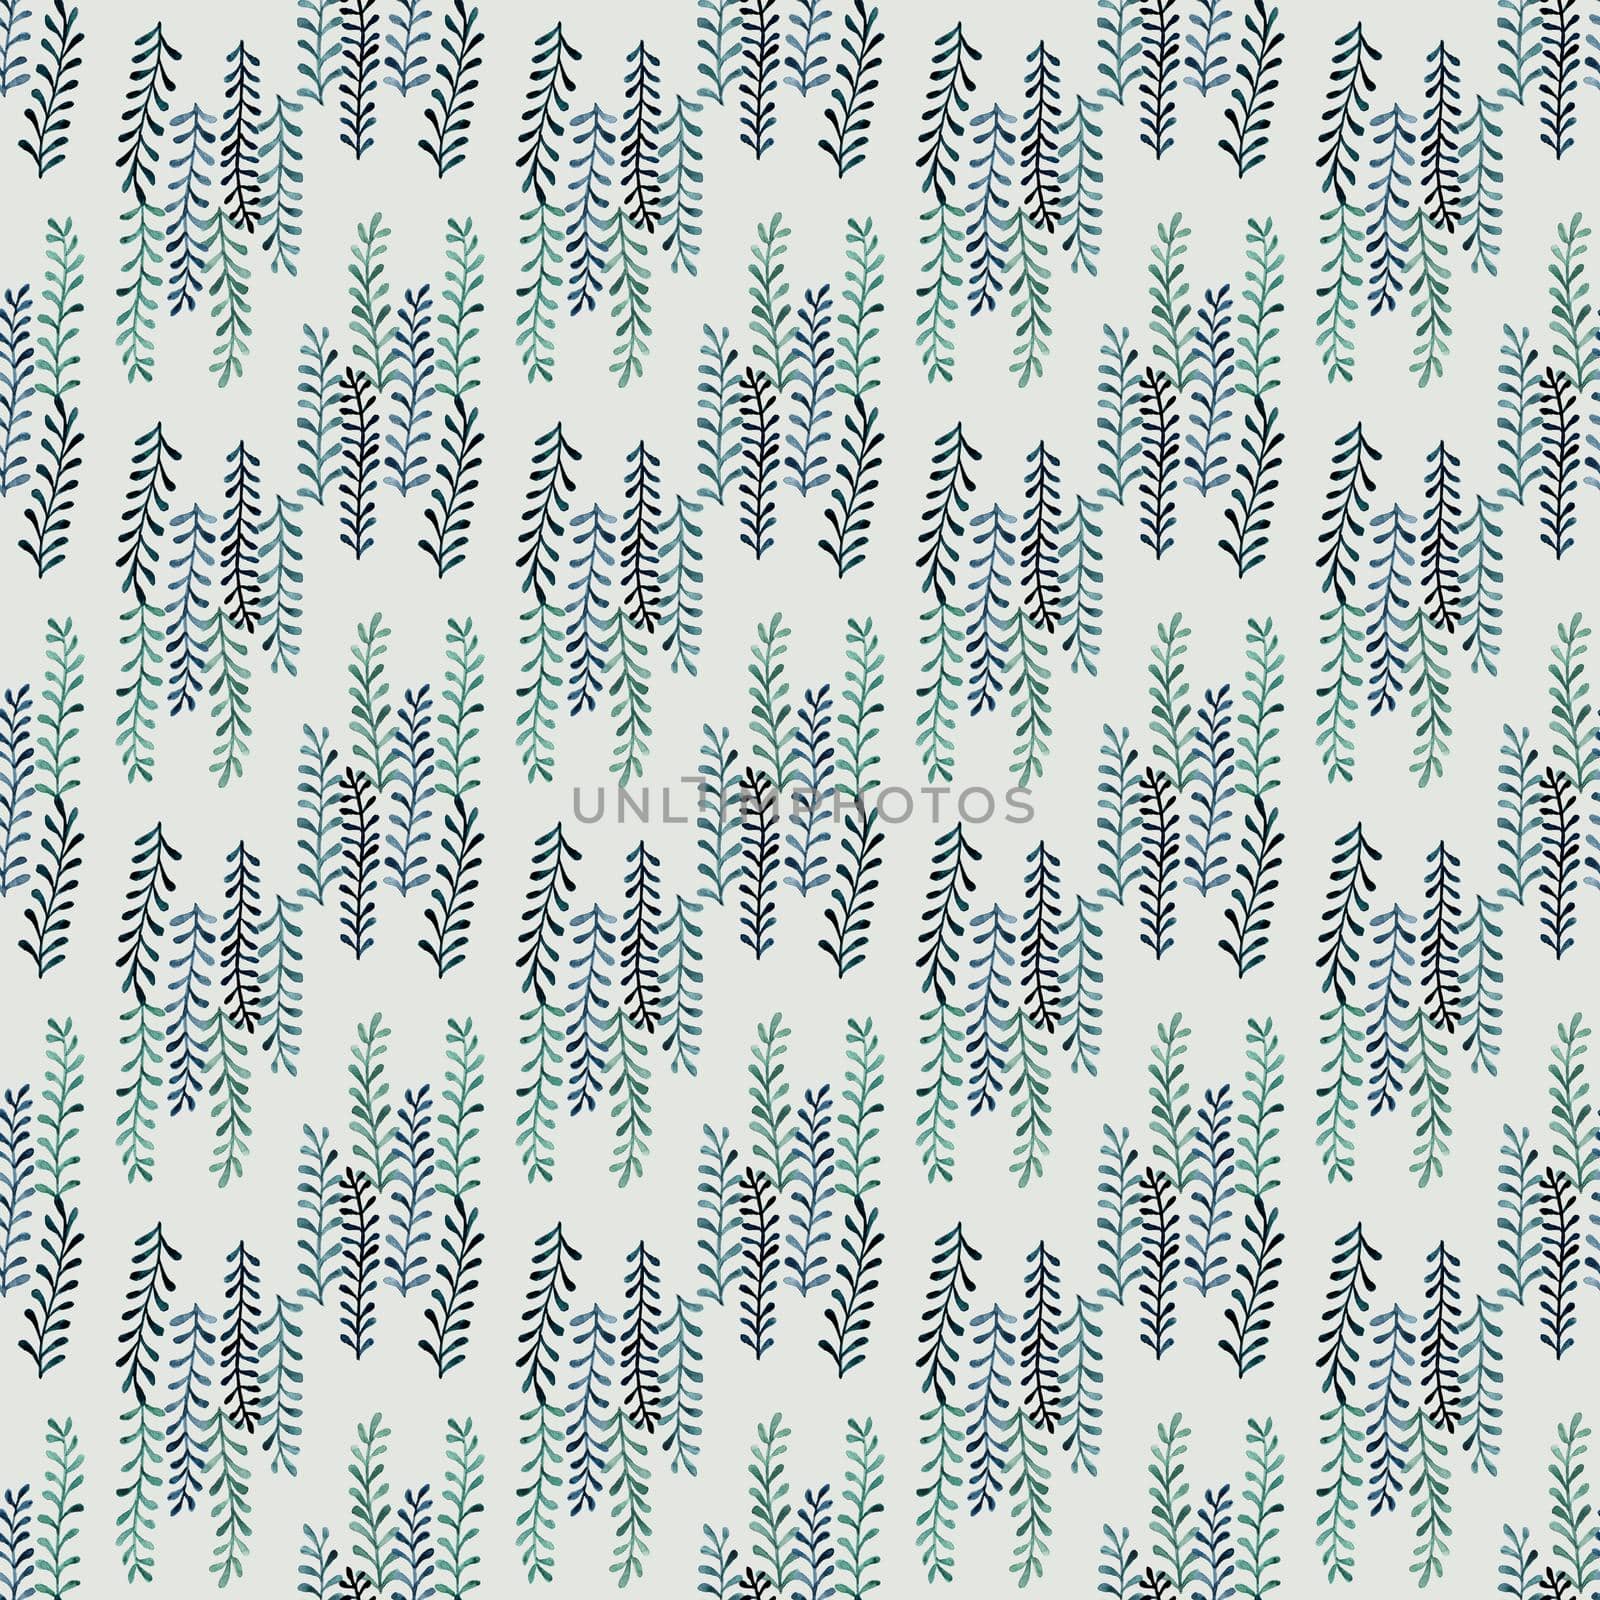 Watercolor seamless pattern with green hand painted leaves and herbs. Textile, wallpaper surface pattern design. by iliris